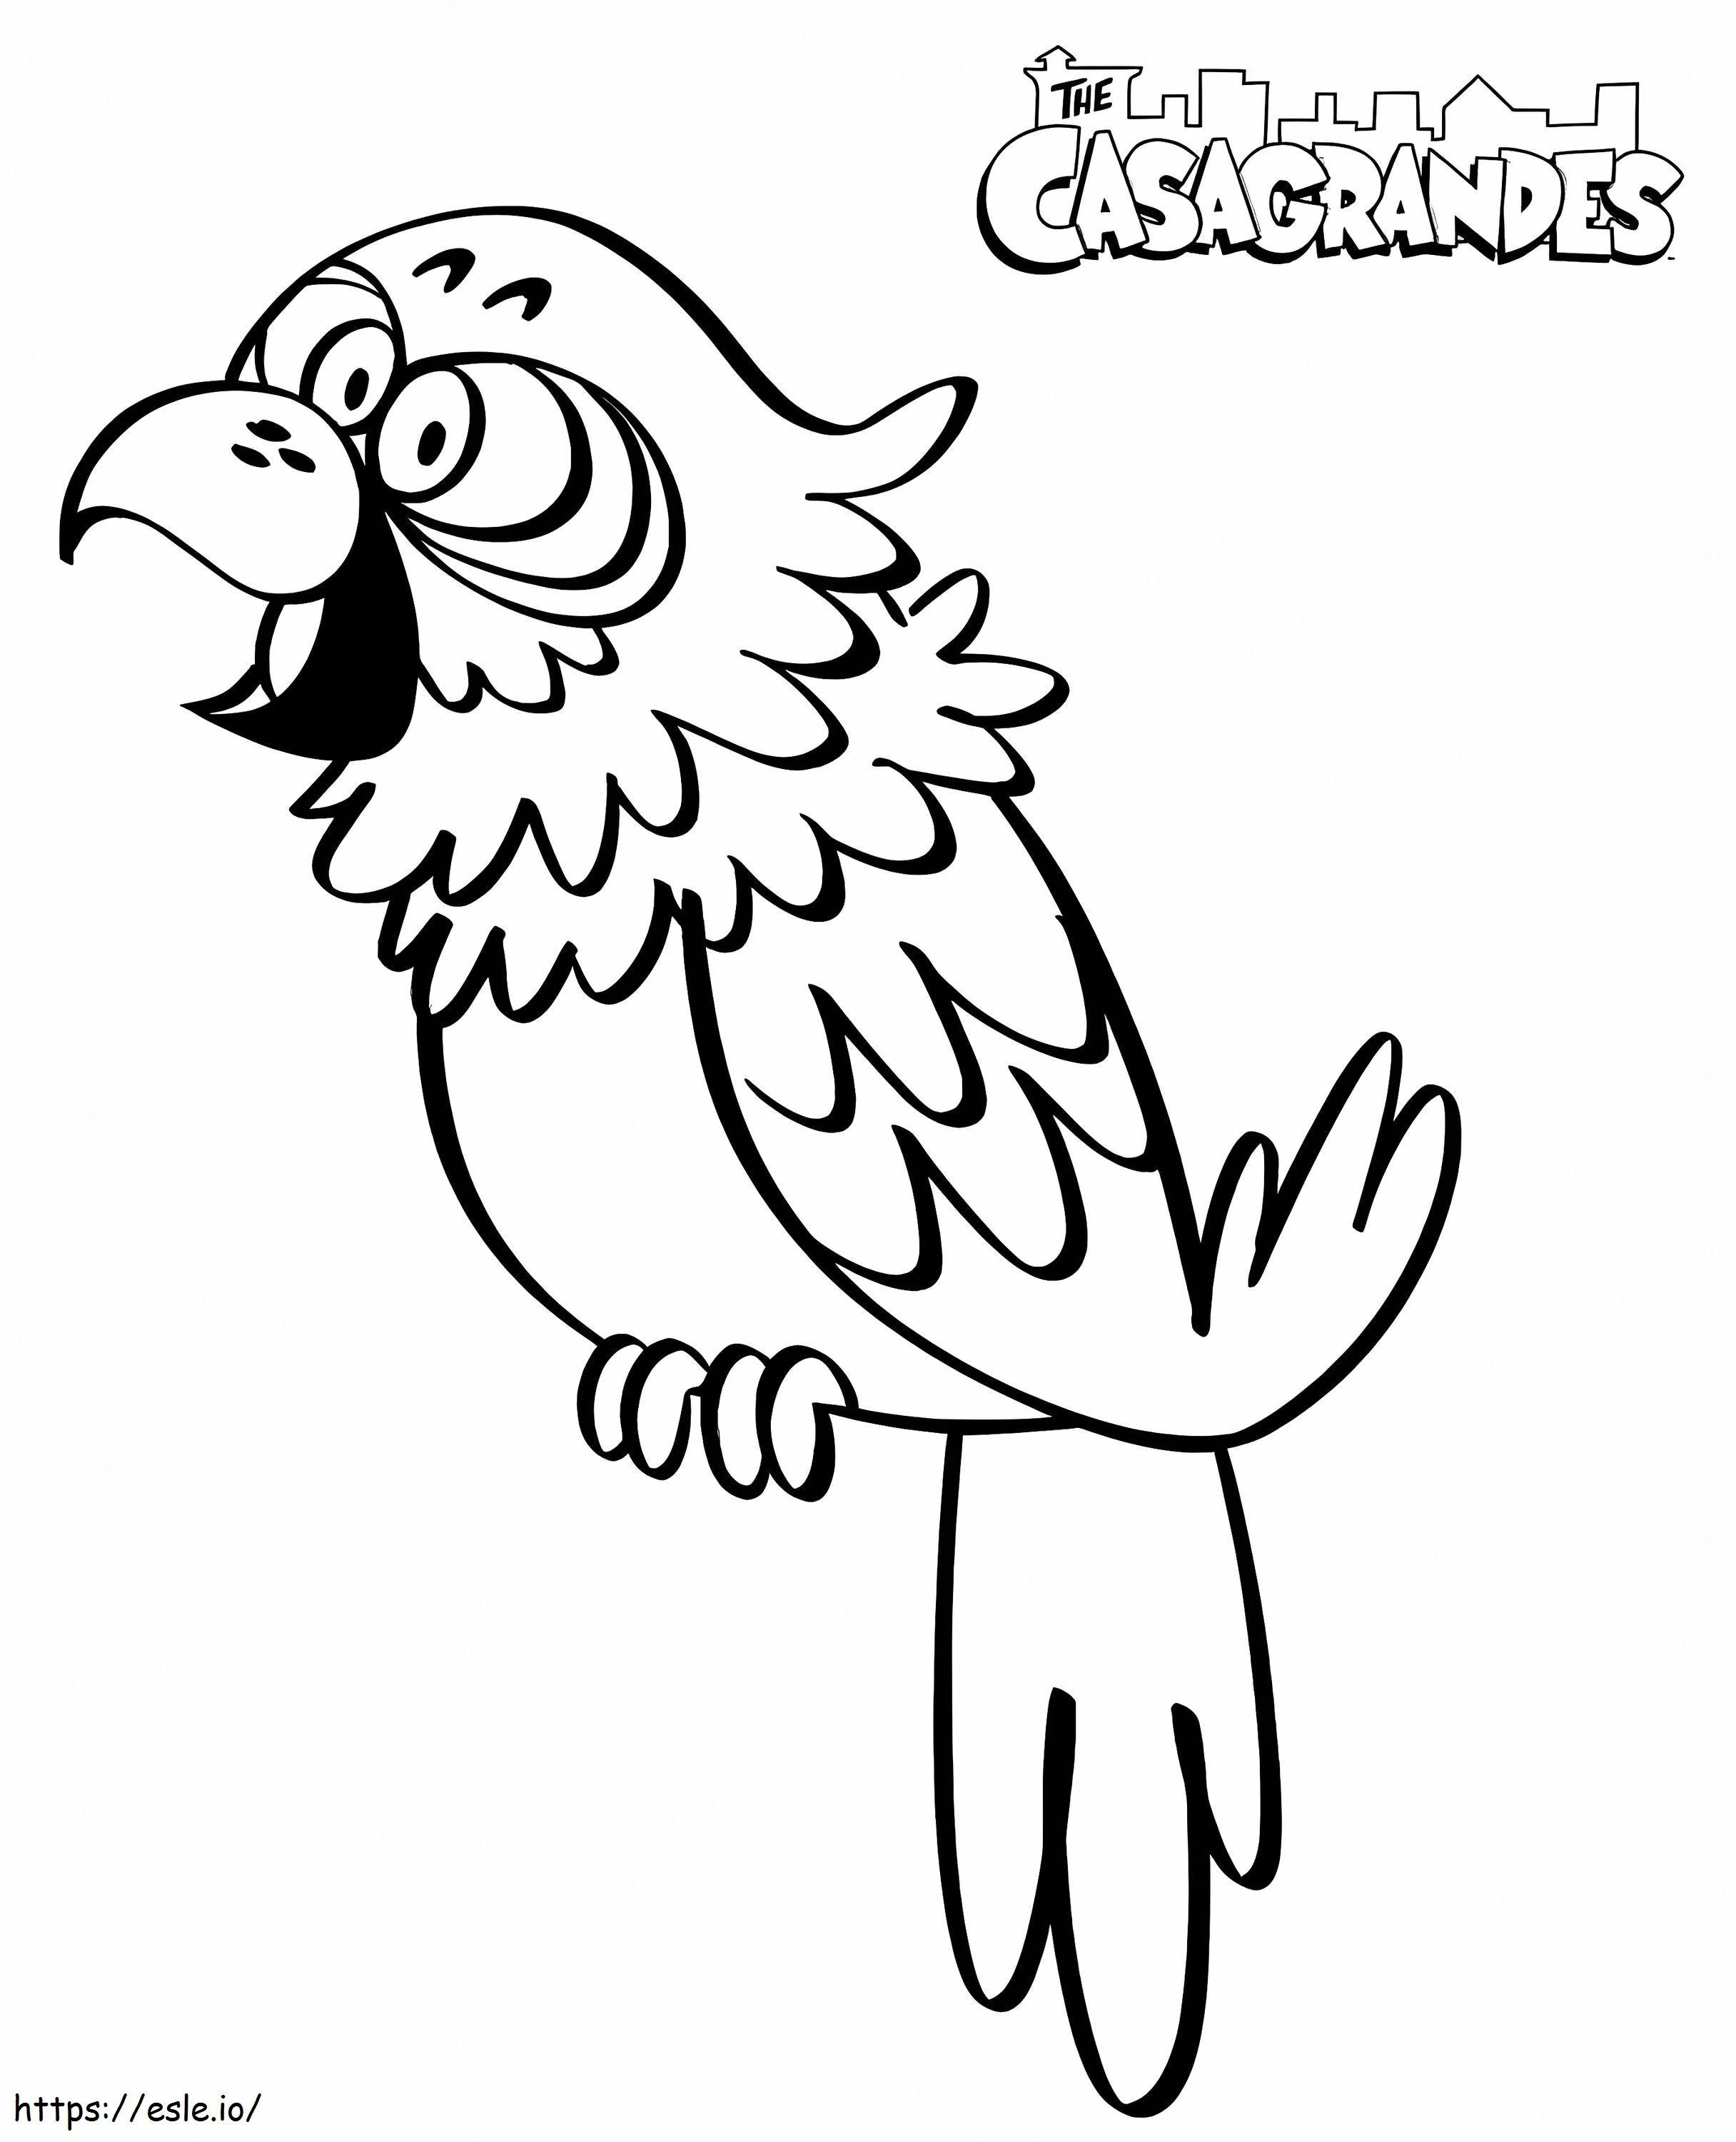 Parrot Sergio coloring page